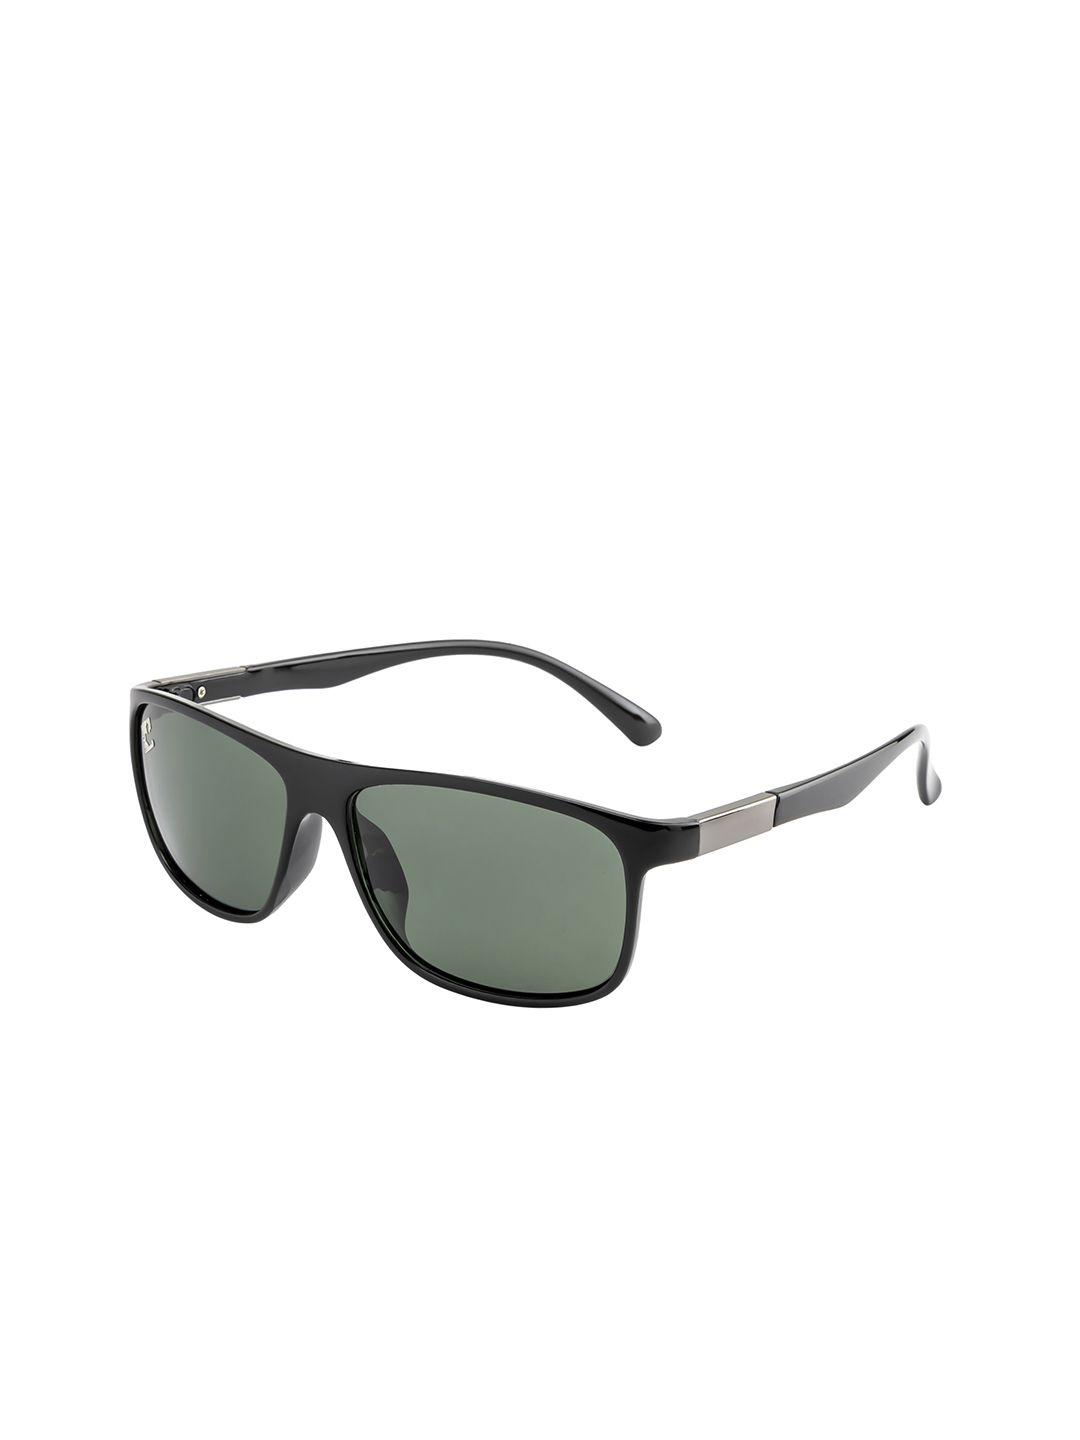 clark n palmer unisex green lens & black shield sunglasses with polarised and uv protected lens